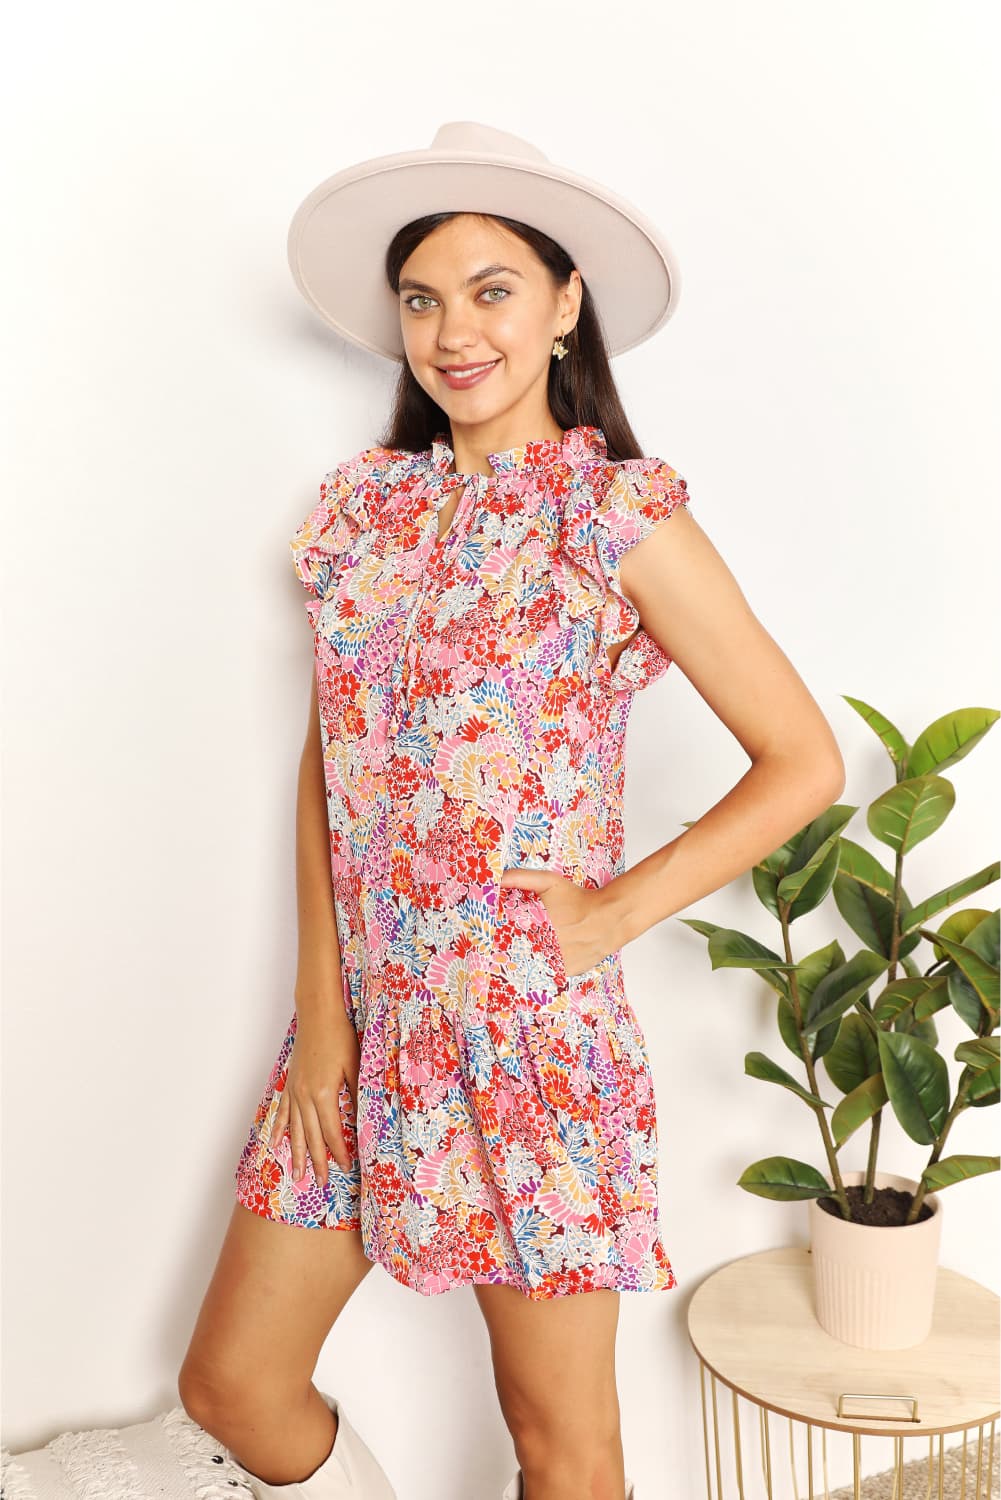 Double Take Floral Tie Neck Cap Sleeve Dress - Tigbuls Variety Fashion